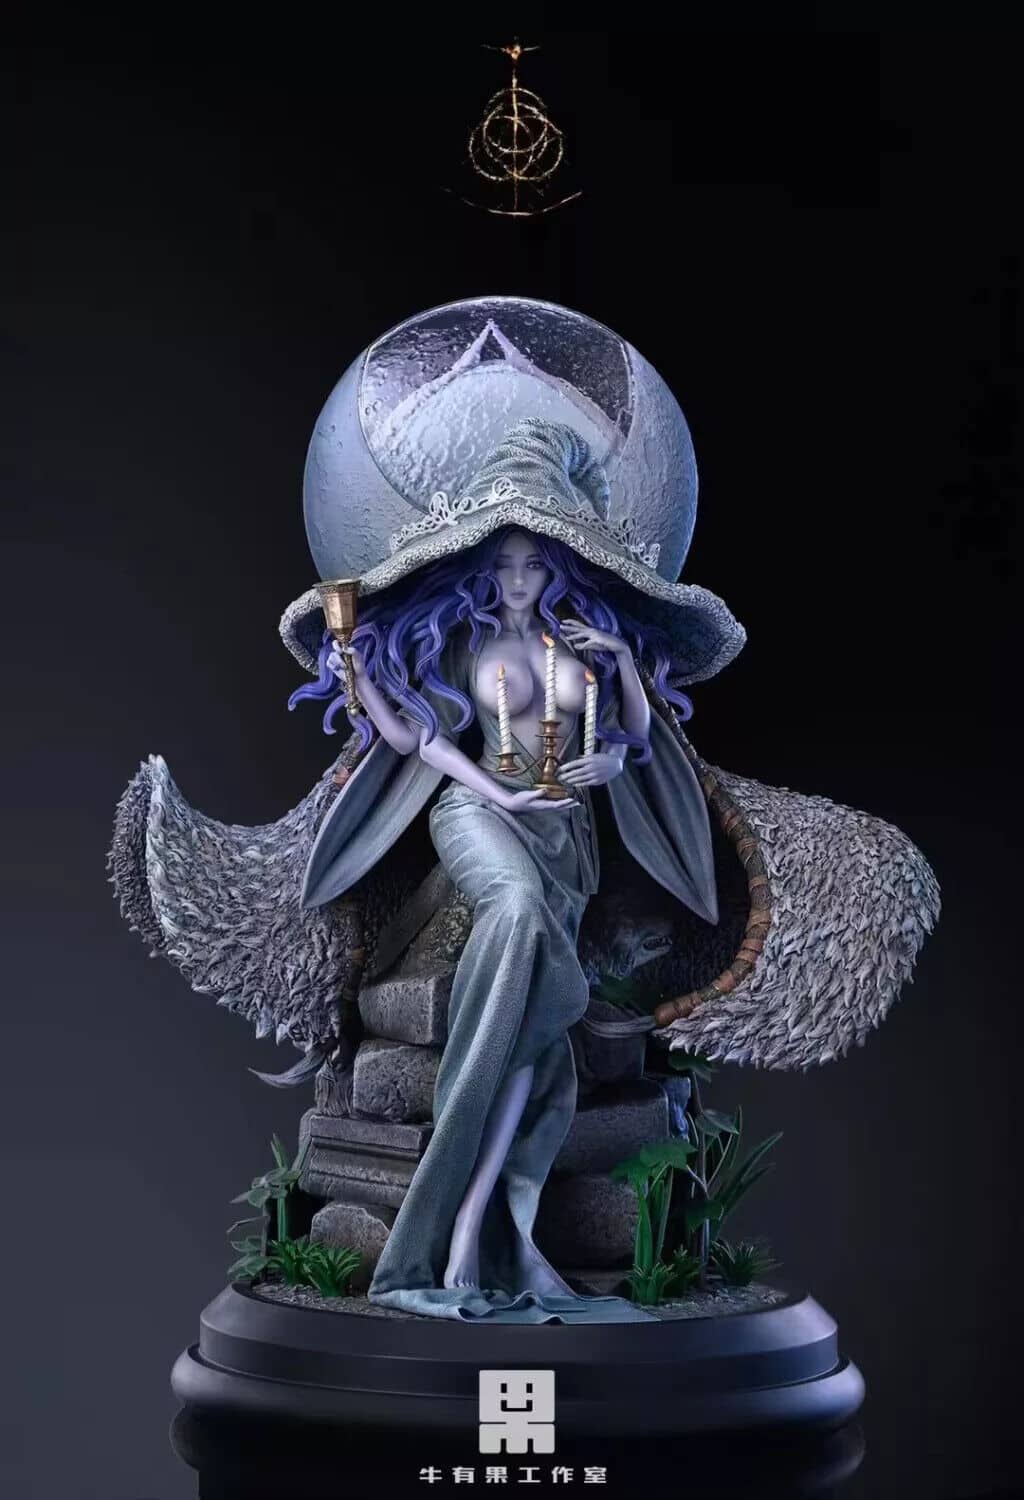 13cm Giant Pot and Ranni the Witch 17cm Video Game ELDEN RING Figures